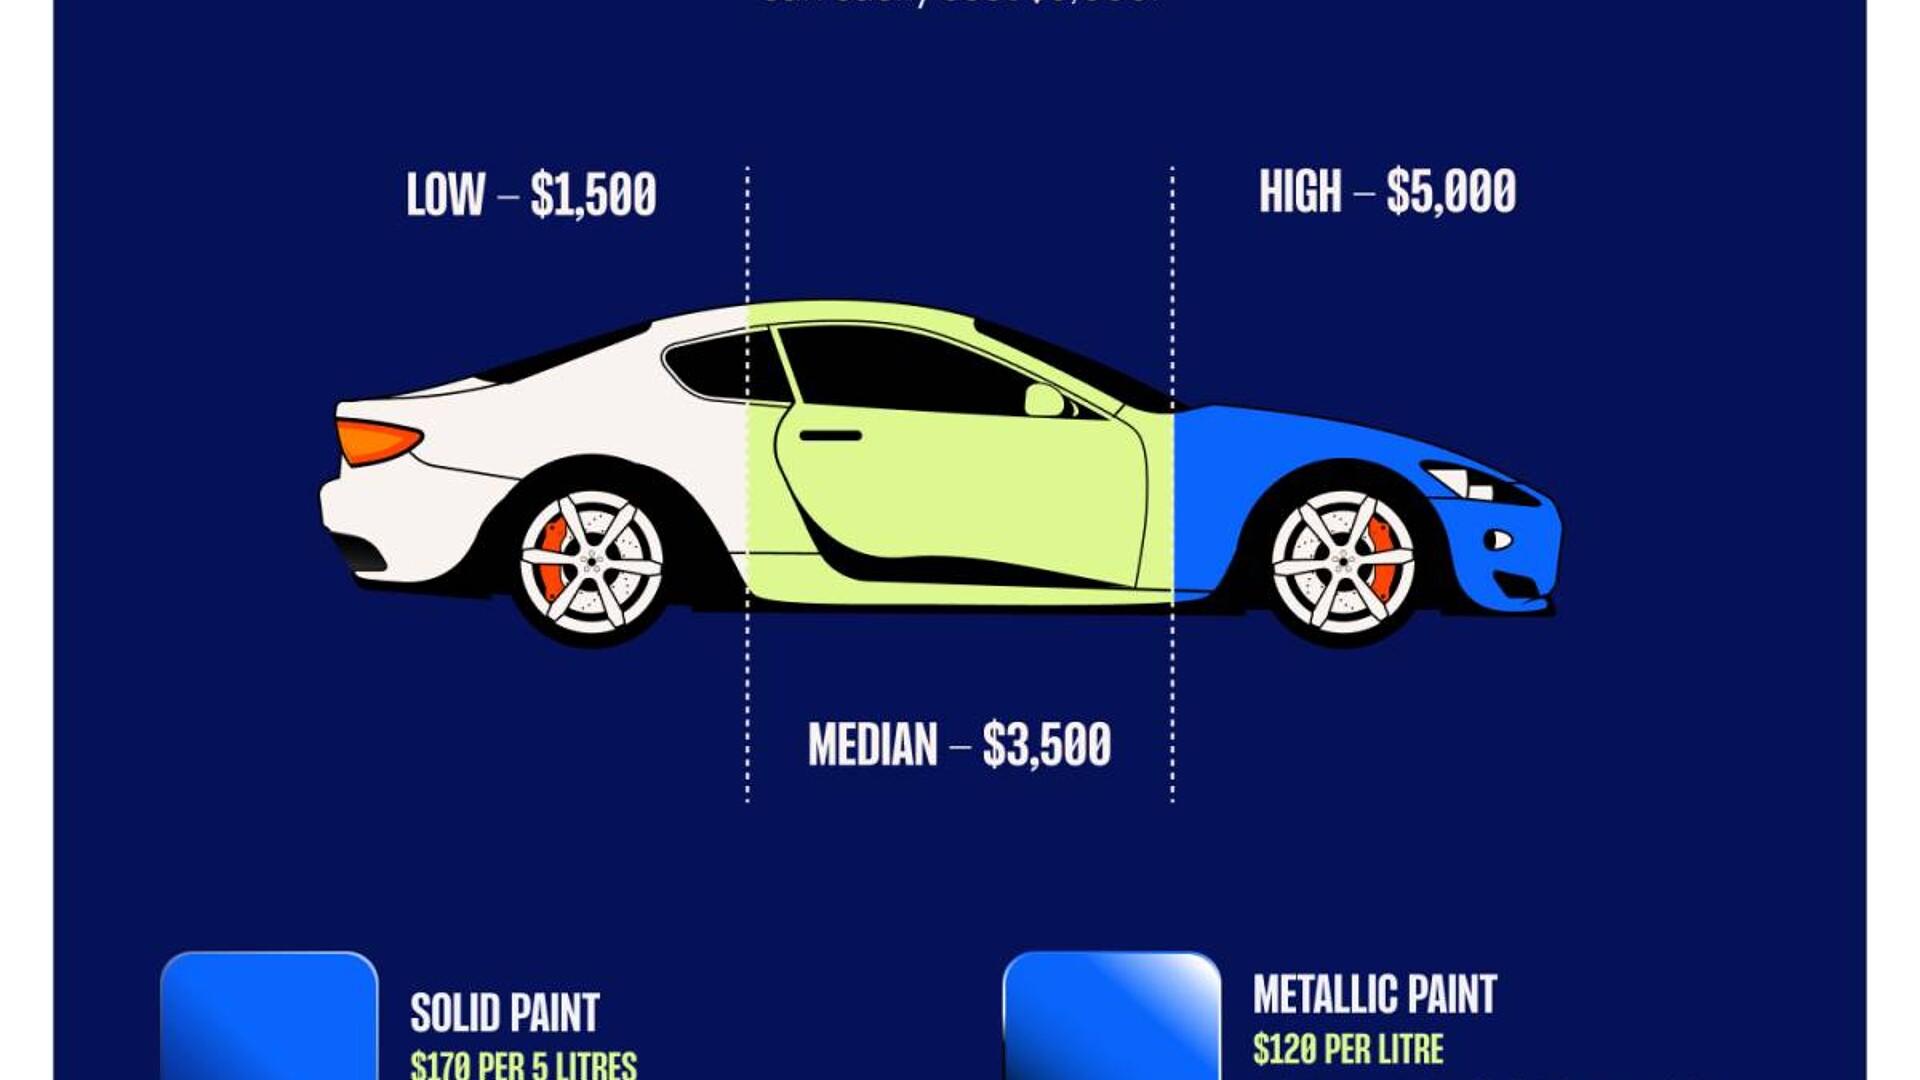 Take Care of Your Car's Metallic Paint